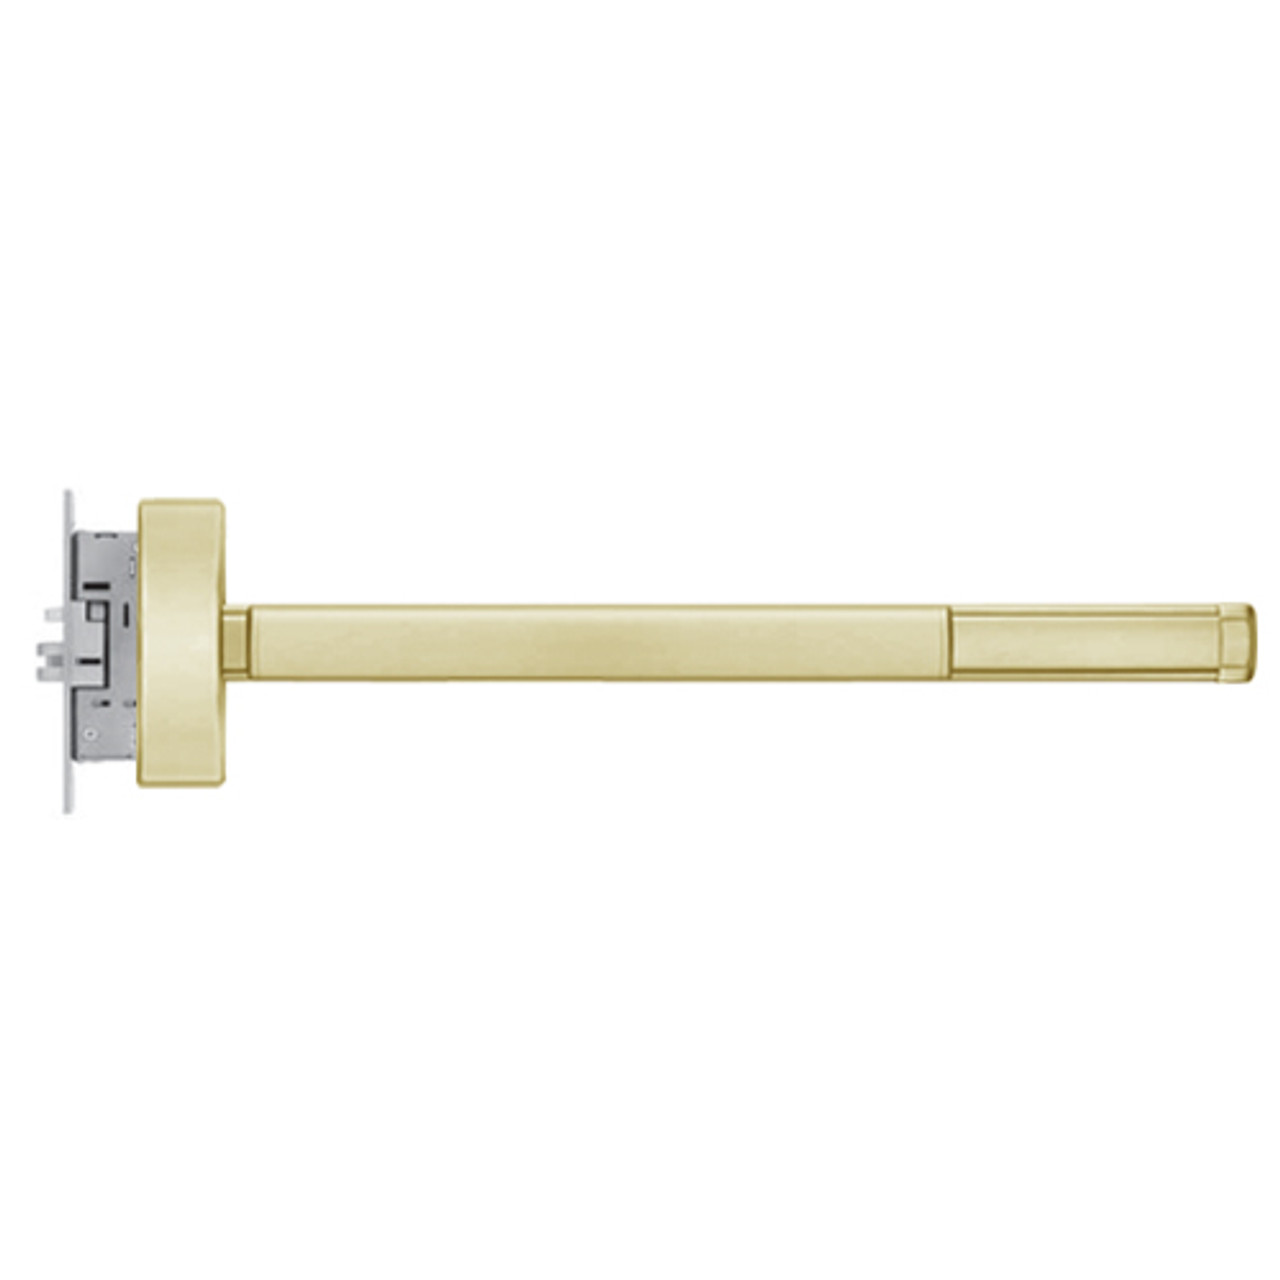 DEFL2303-RHR-606-48 PHI 2300 Series Fire Rated Apex Mortise Exit Device with Delayed Egress Prepped for Key Retracts Latchbolt in Satin Brass Finish